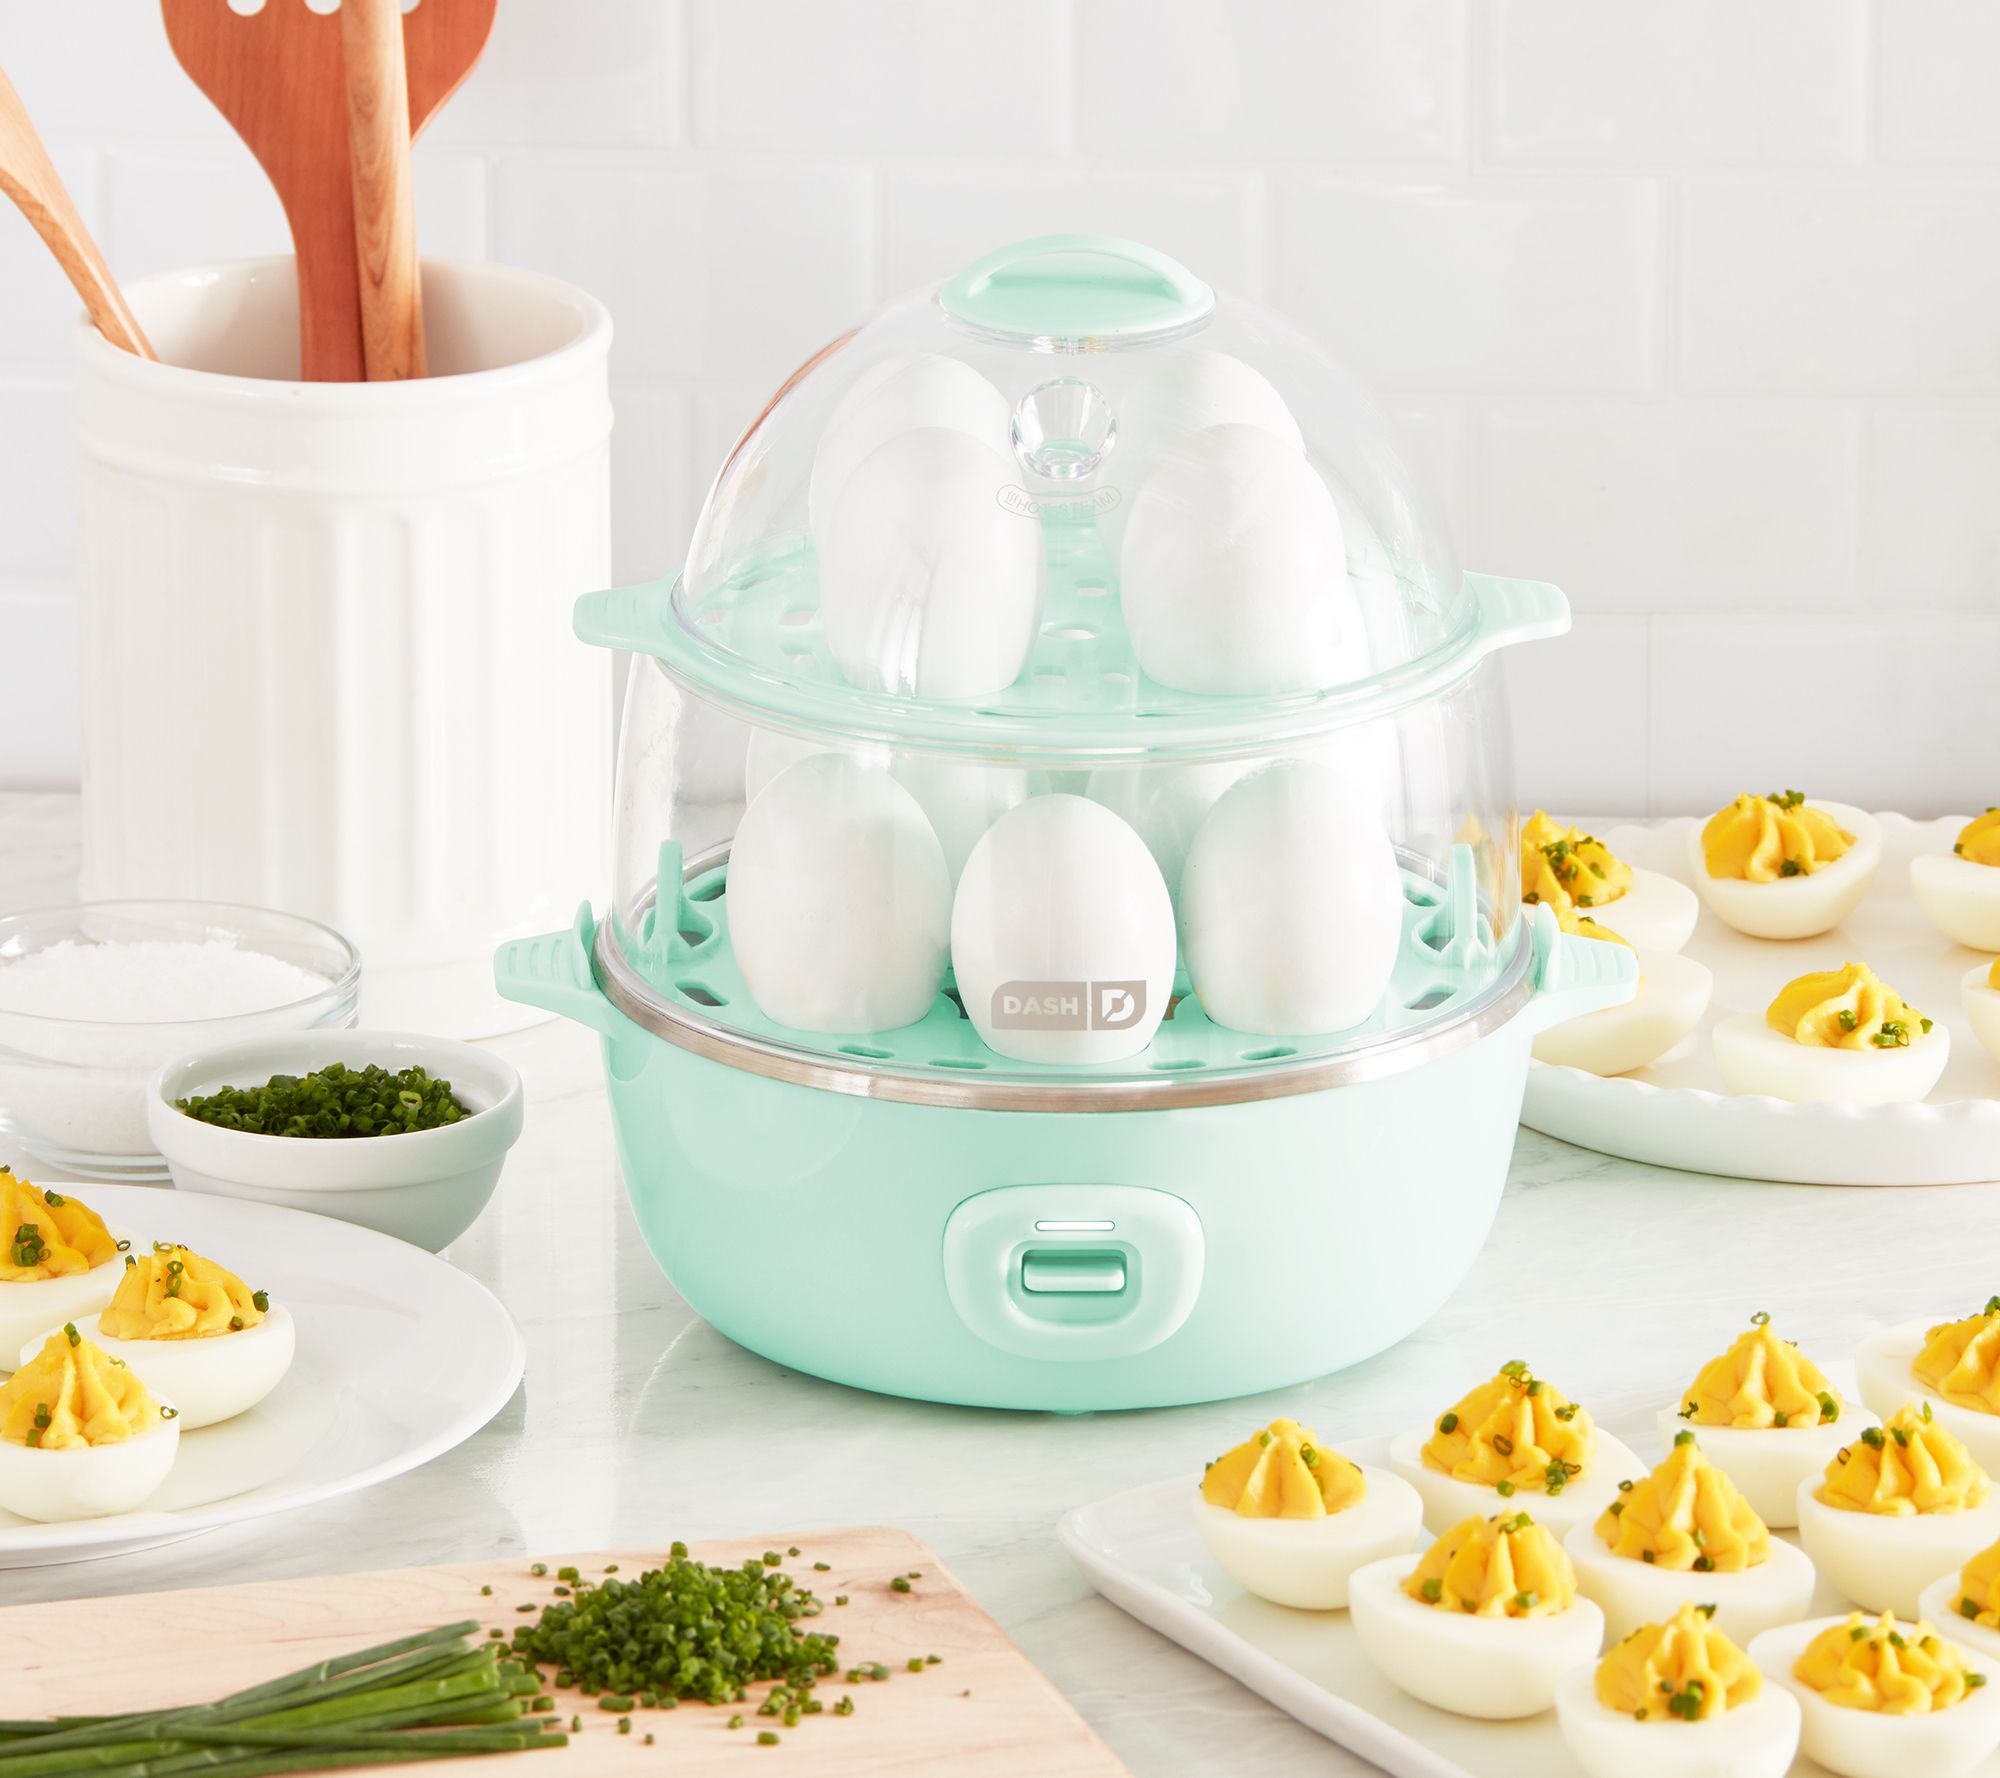 Dash Deluxe Express Two-Tier Egg Cooker Cooker 